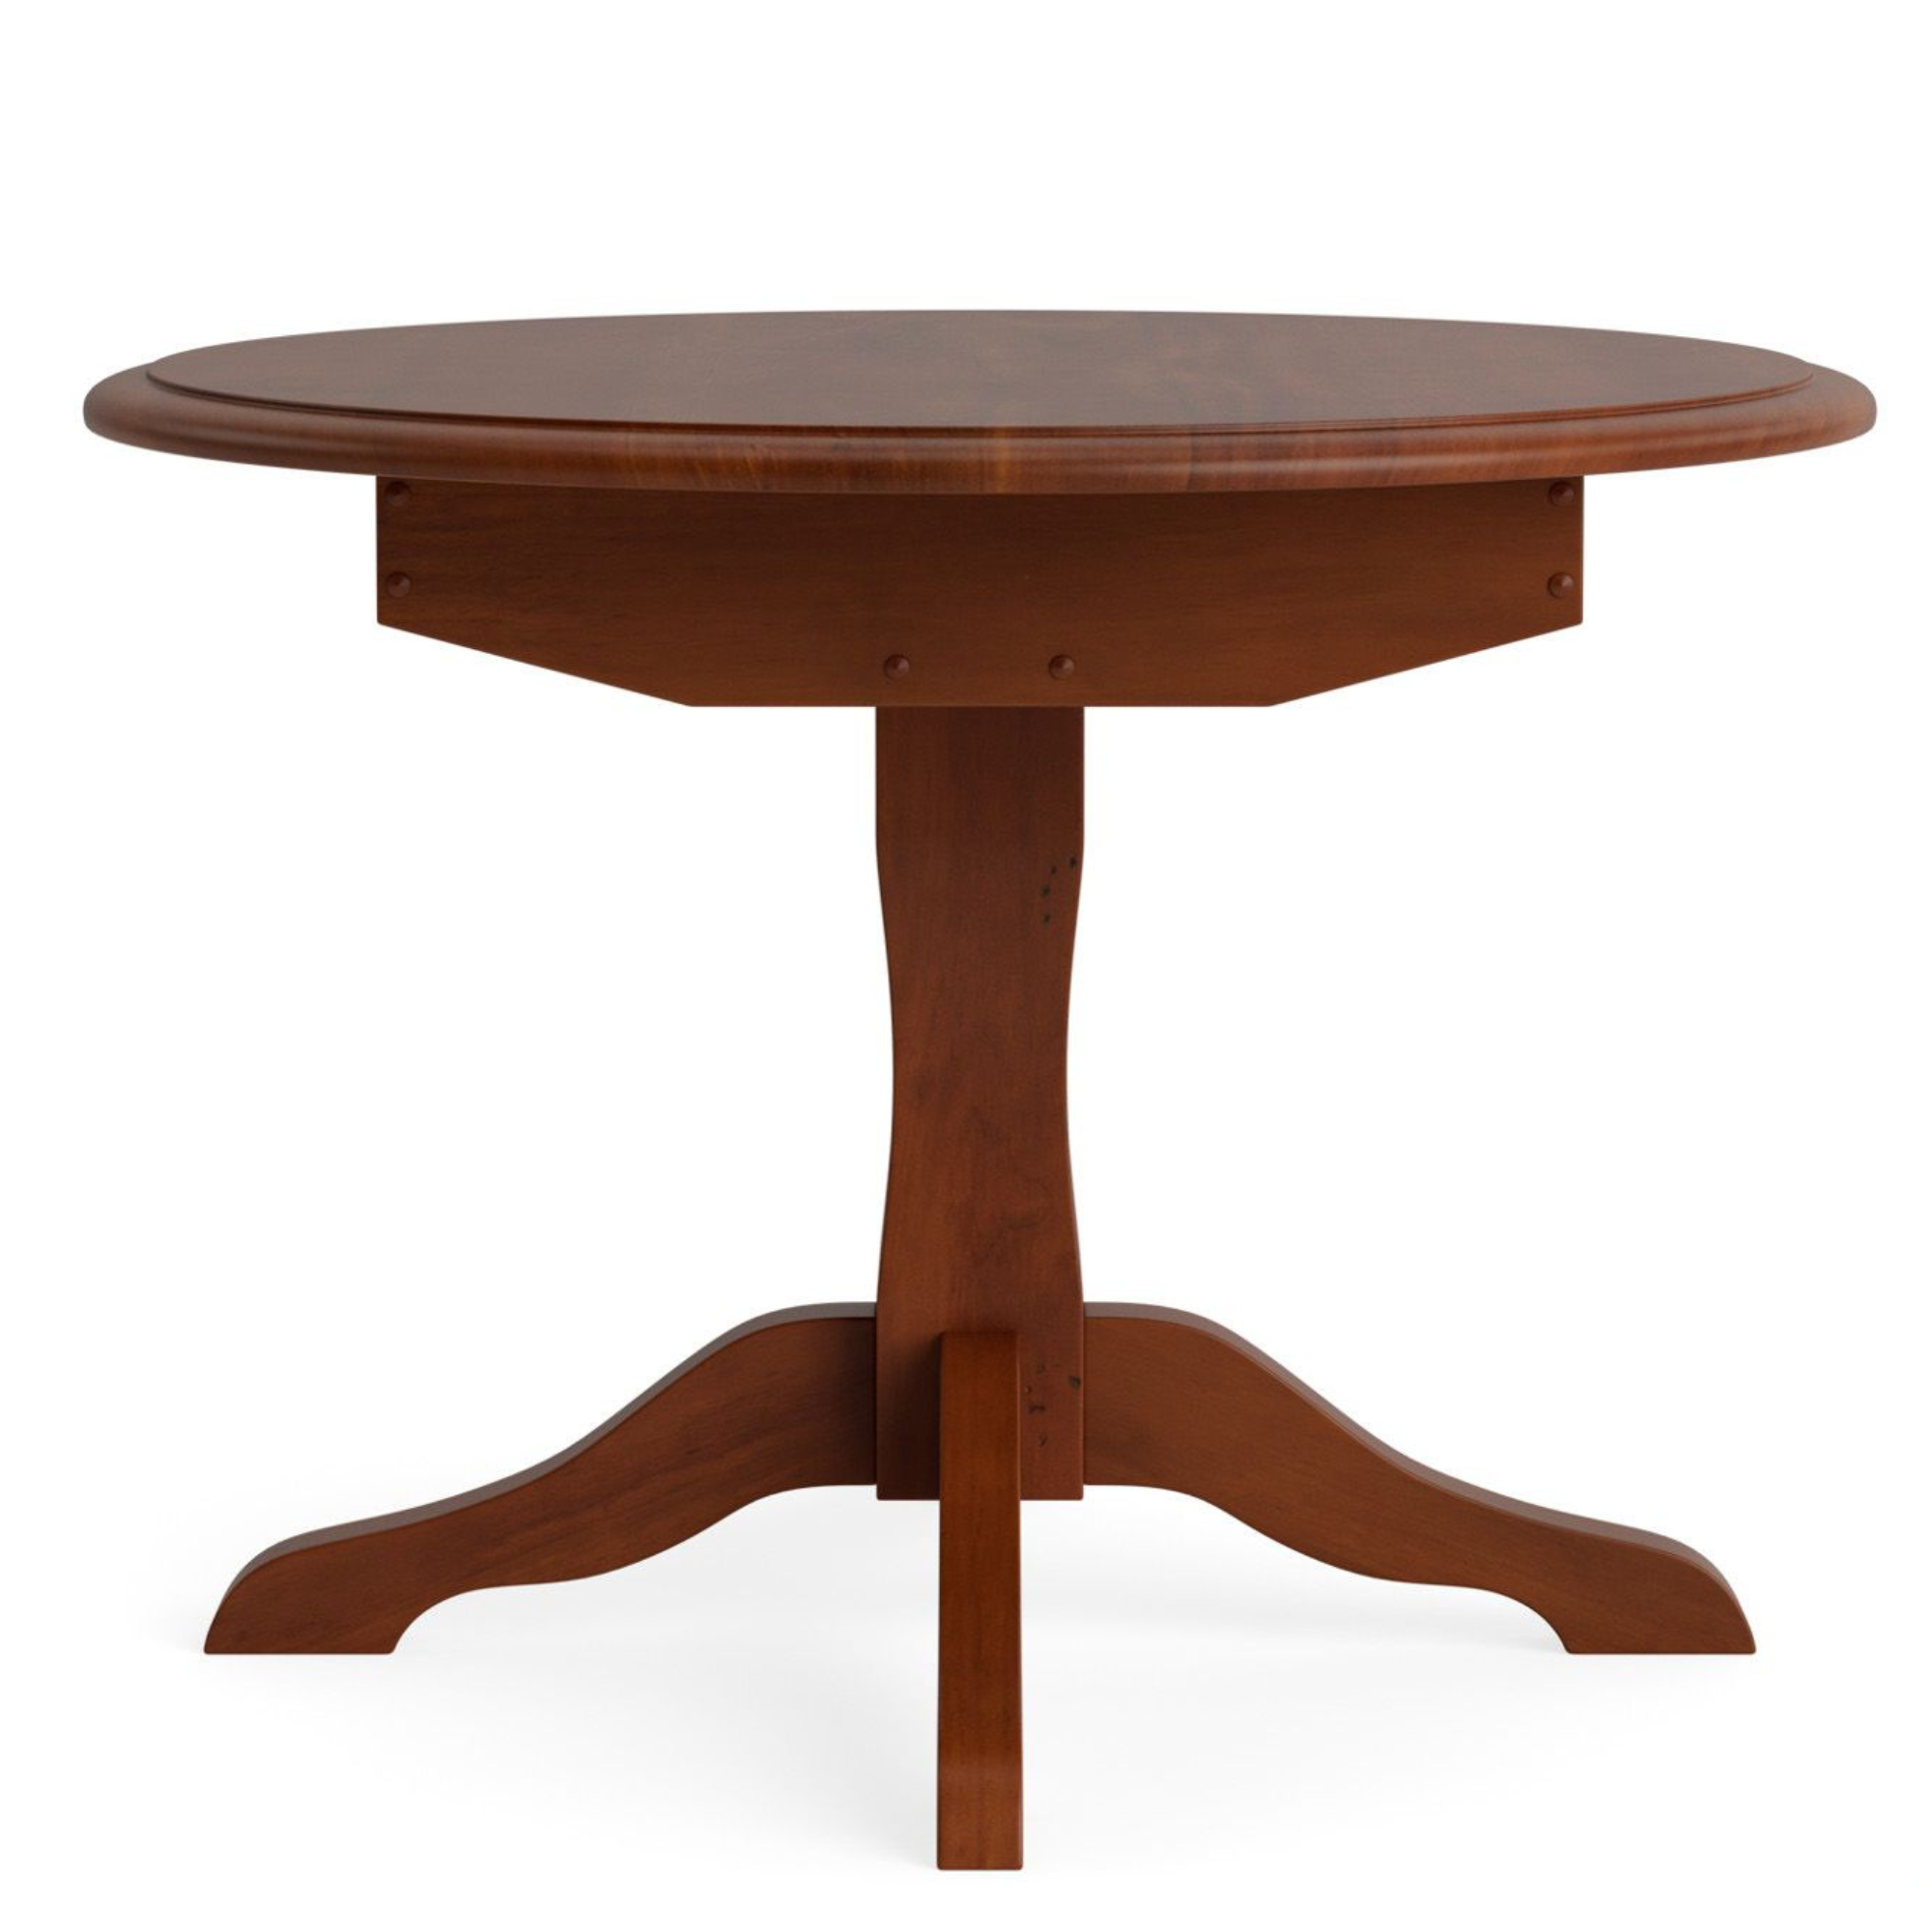 VILLAGER 1050 ROUND DINING TABLE | NZ MADE